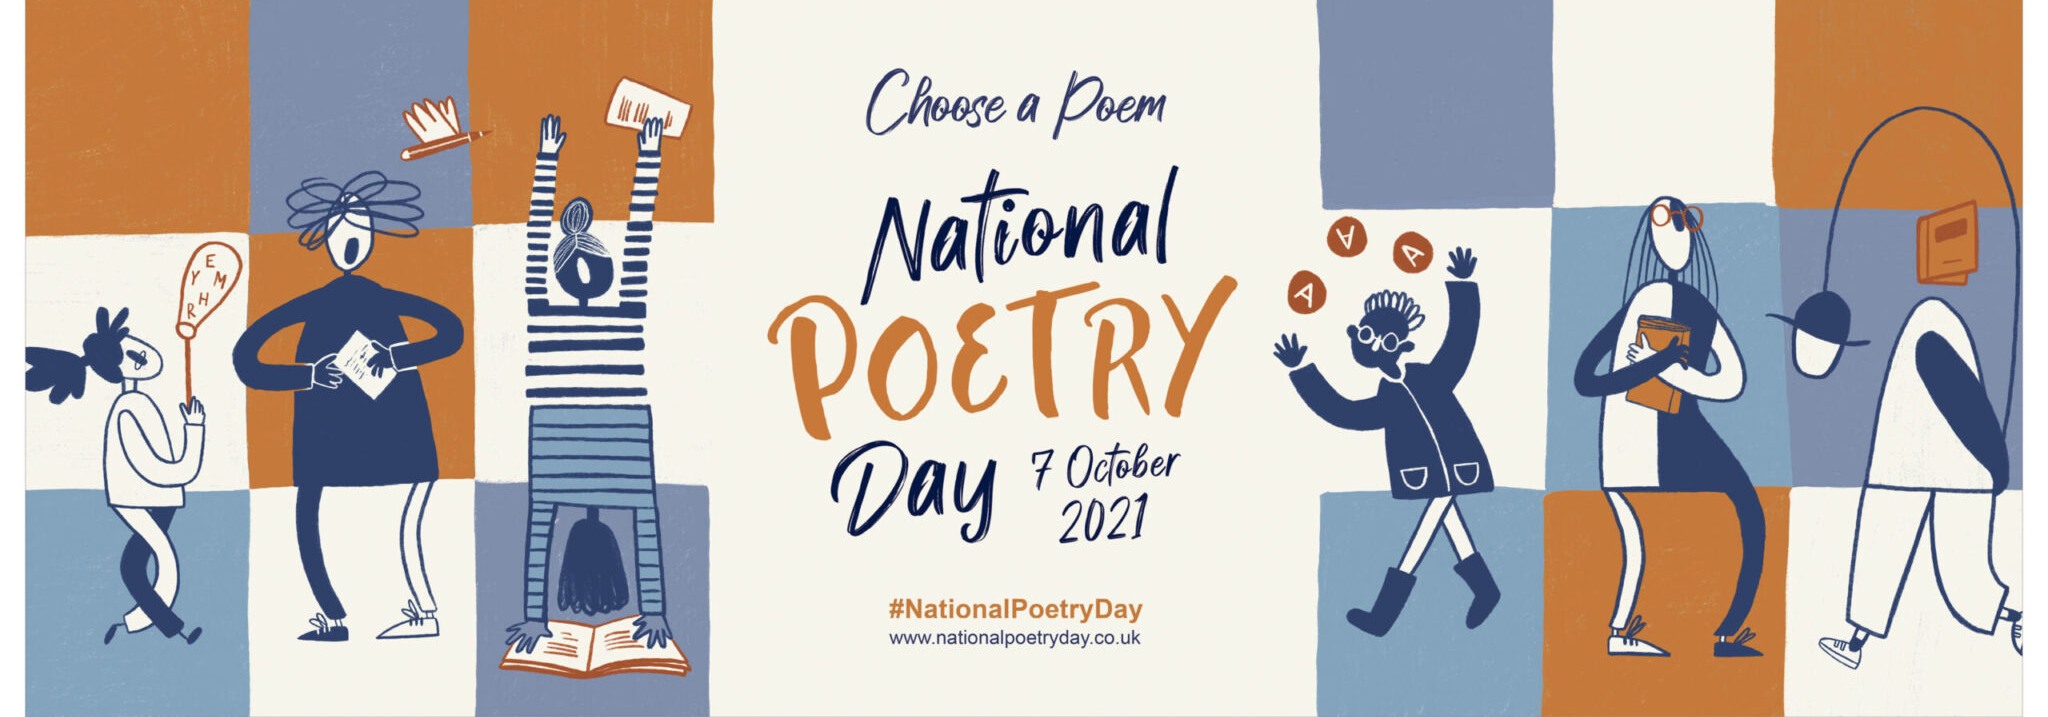 National Poetry Day website